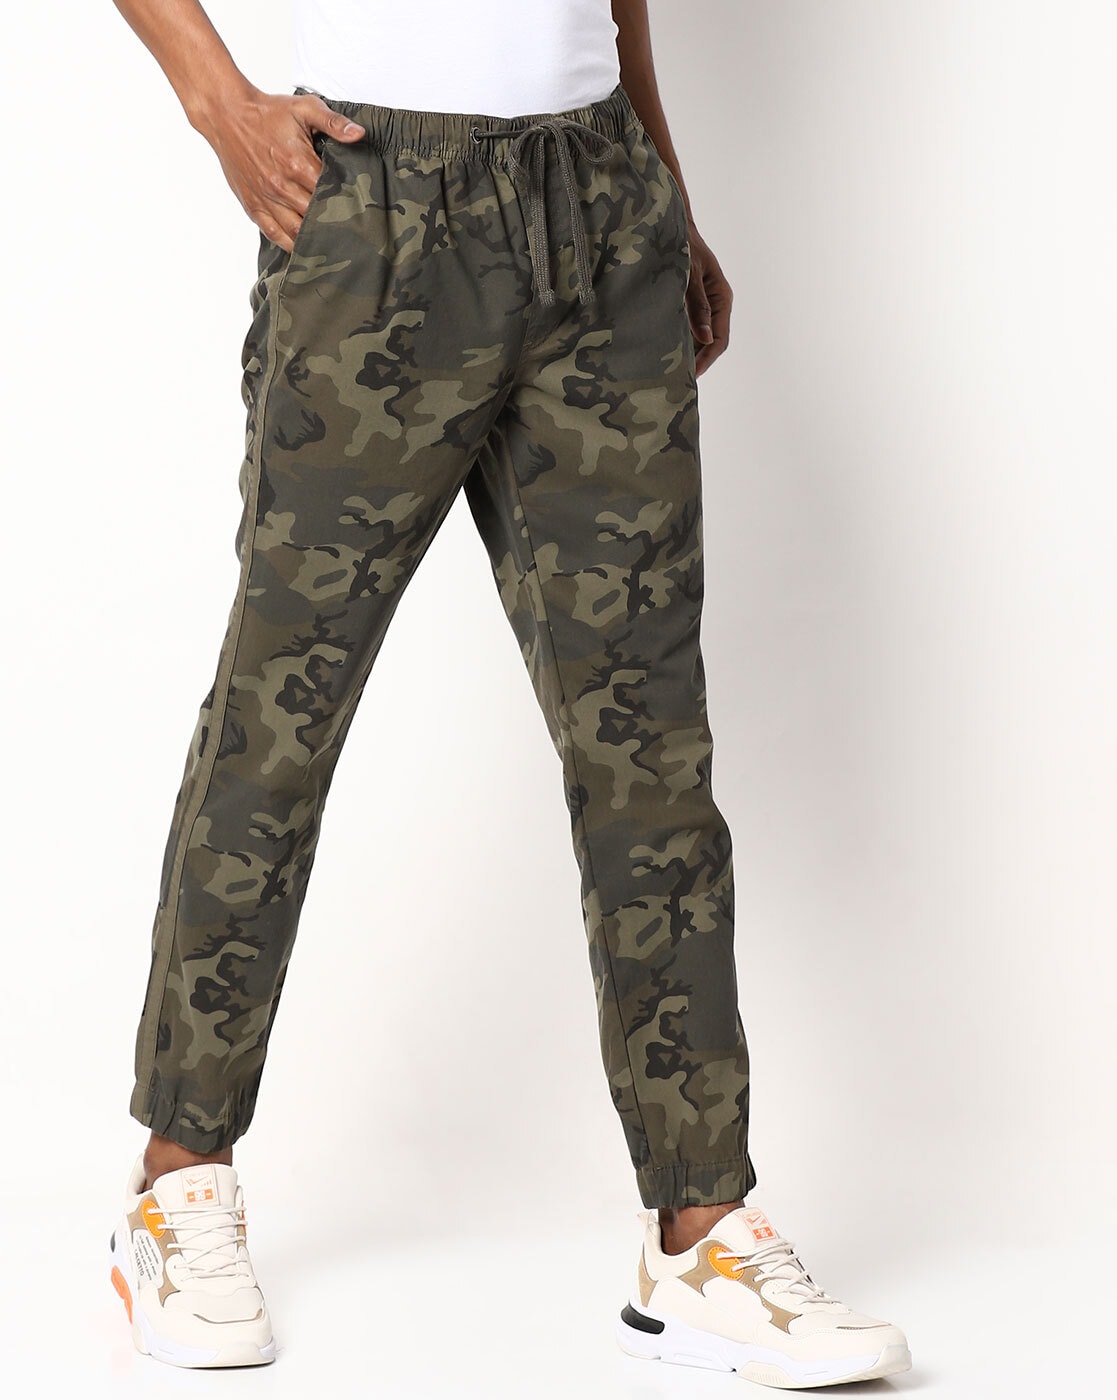 Buy Nordbury Ladies Italian Camouflage Army Print Trousers Womens Camo  Combat Trousers Magic Crushed Joggers Stretch Camouflage Pants Online in  India - Etsy